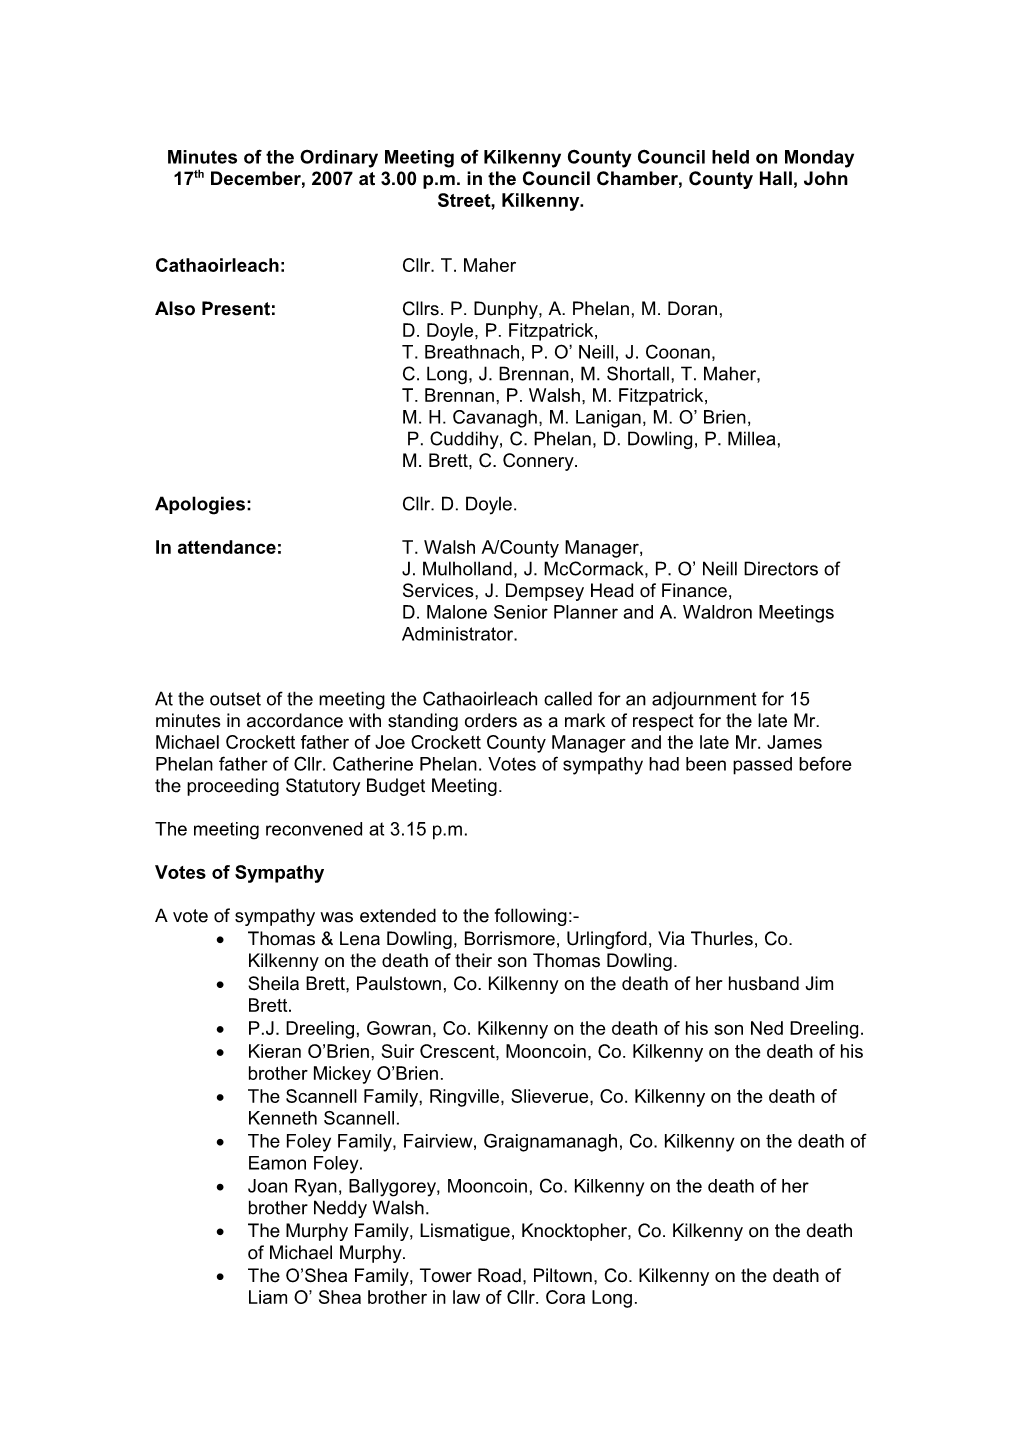 Minutes of the Ordinary Meeting of Kilkenny County Council Held on Tuesday 20Th November